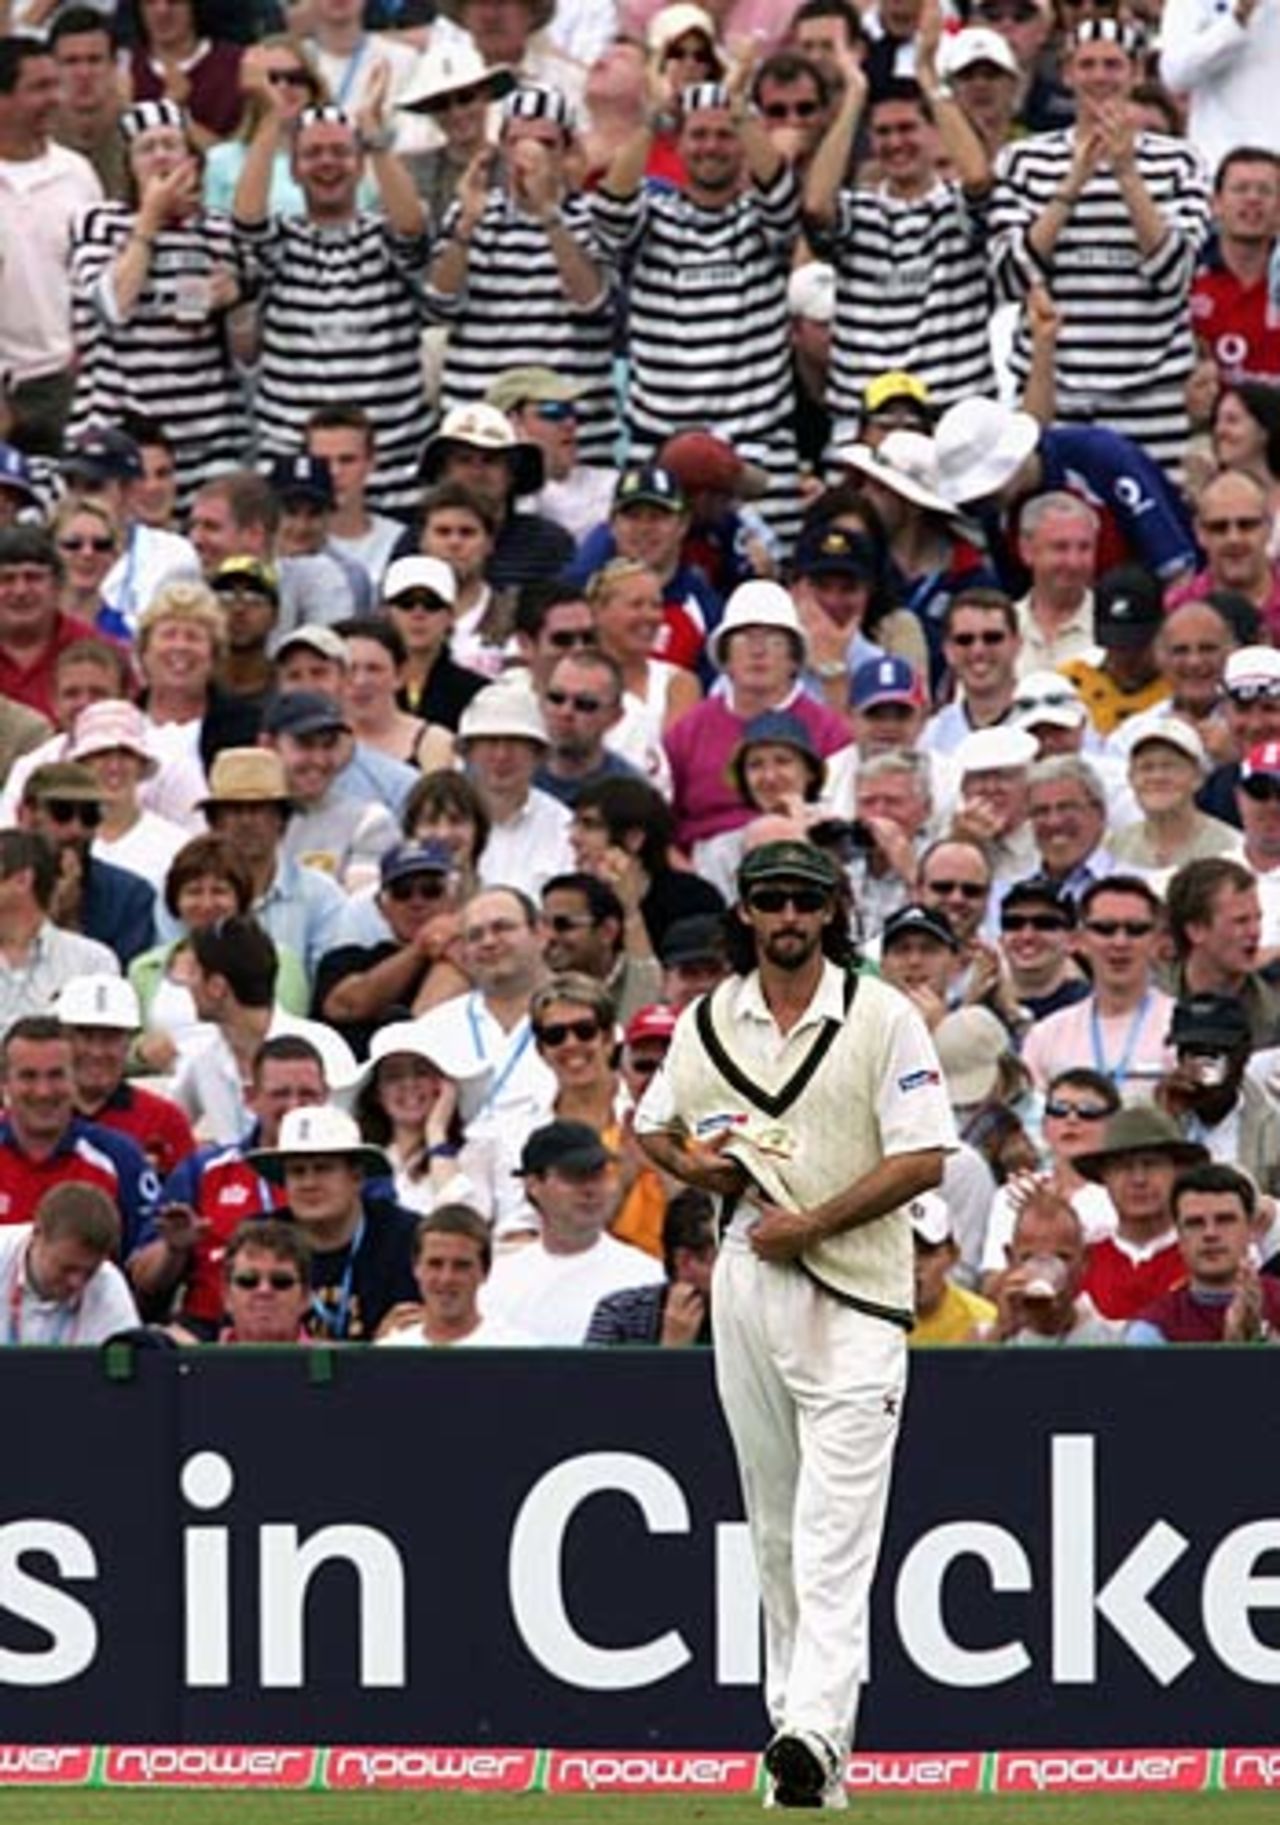 The last hurrah?  Jason Gillespie mocked by the crowd after being taken out of the attack following his four overs for 23, England v Australia, 3rd Test, Old Trafford, August 14, 2005